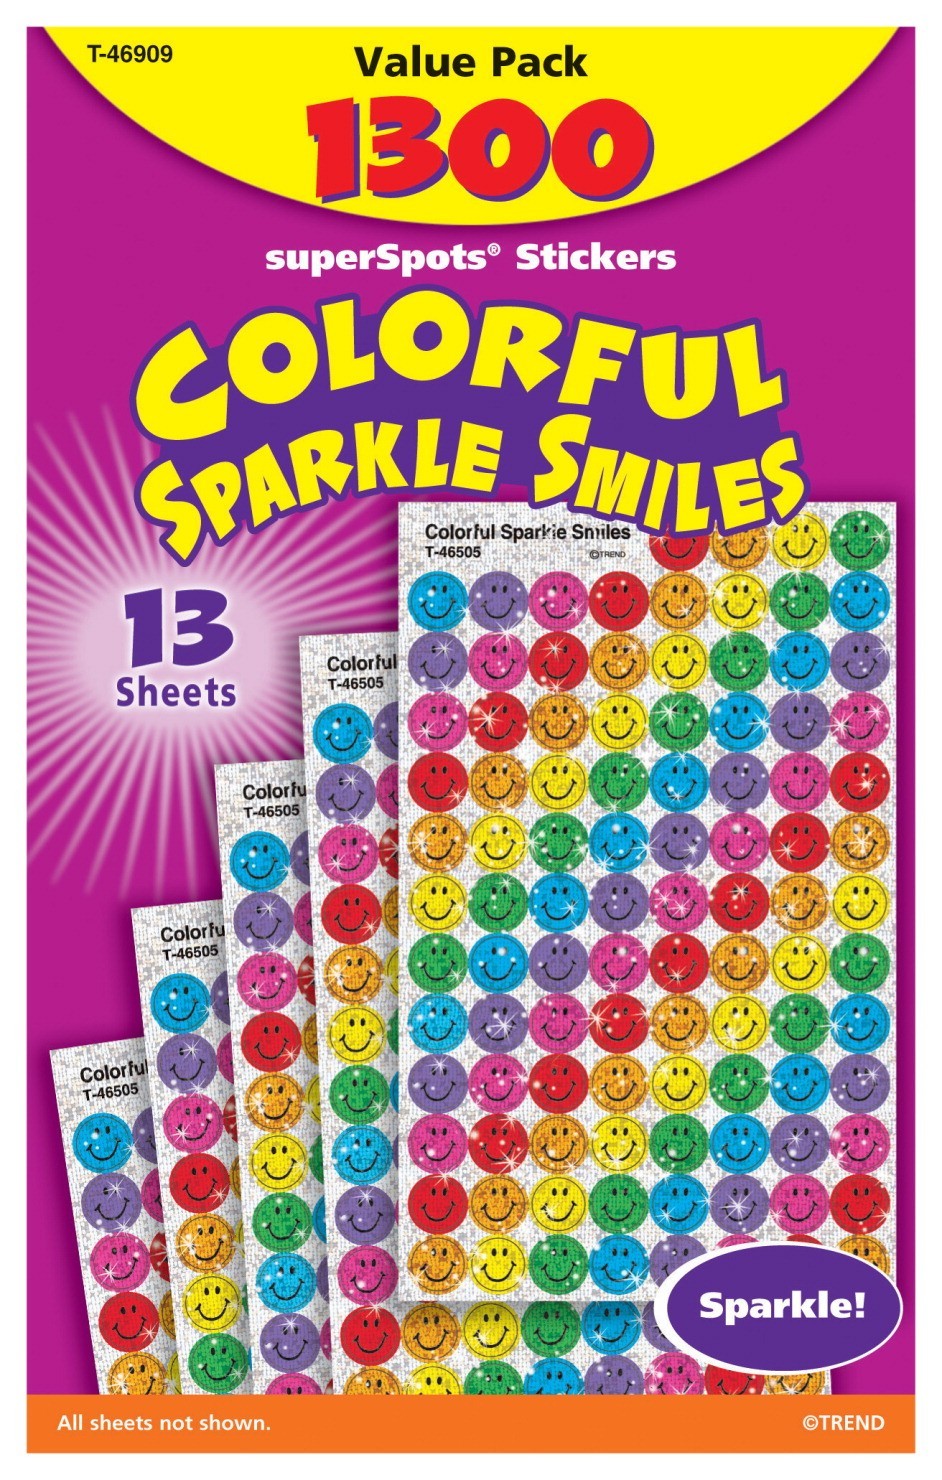 SuperSpots Colorful Sparkle Smiles Sticker Variety Pack, 3/8 In. - 1300/Pkg